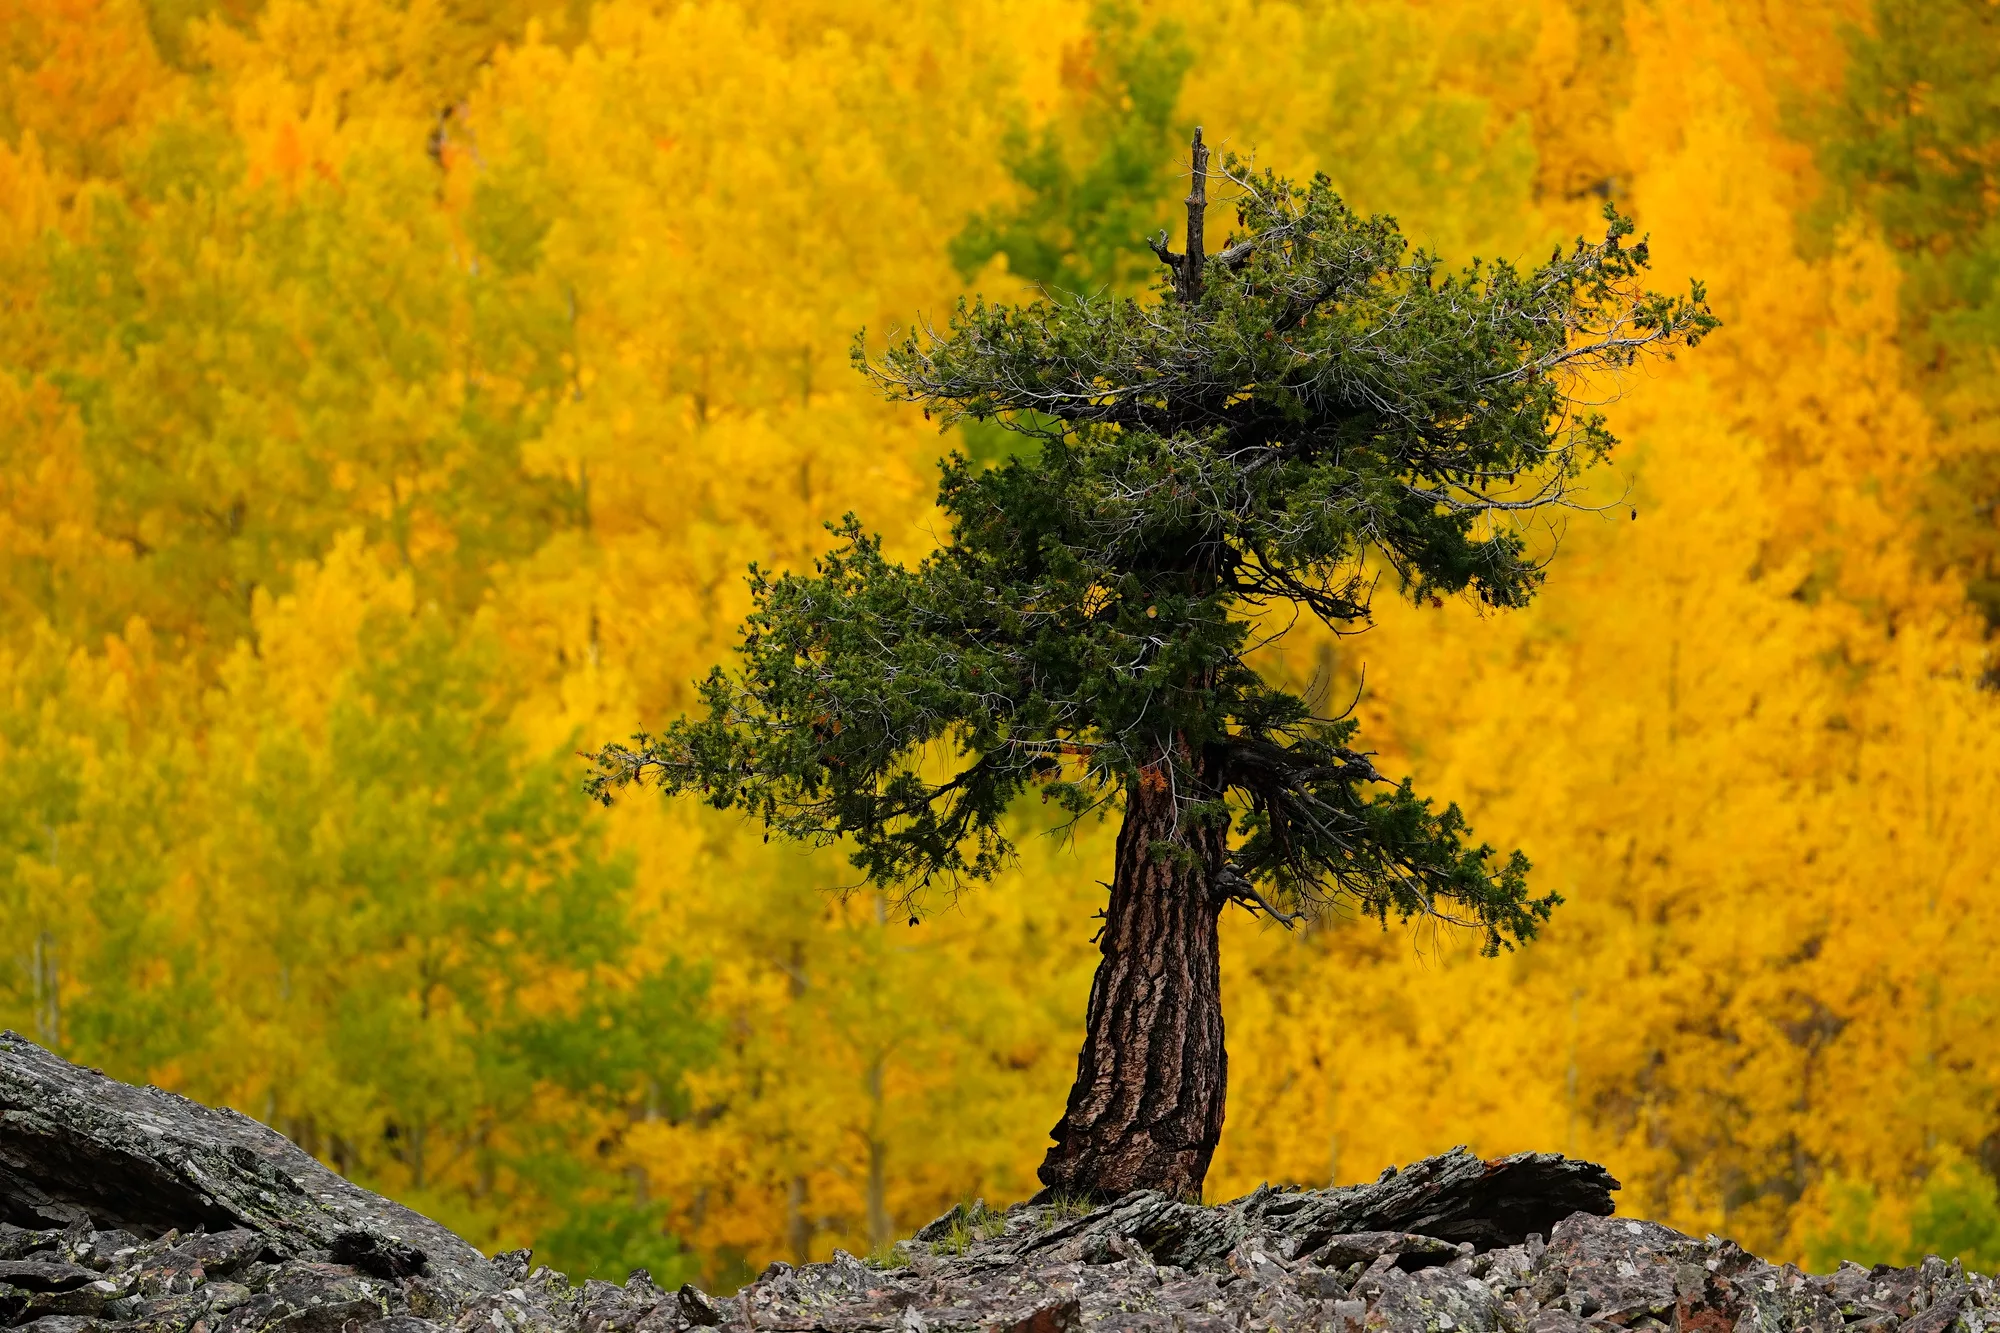 Don Mammoser Colorado Guided Photography Tour Aspens and Pine Tree